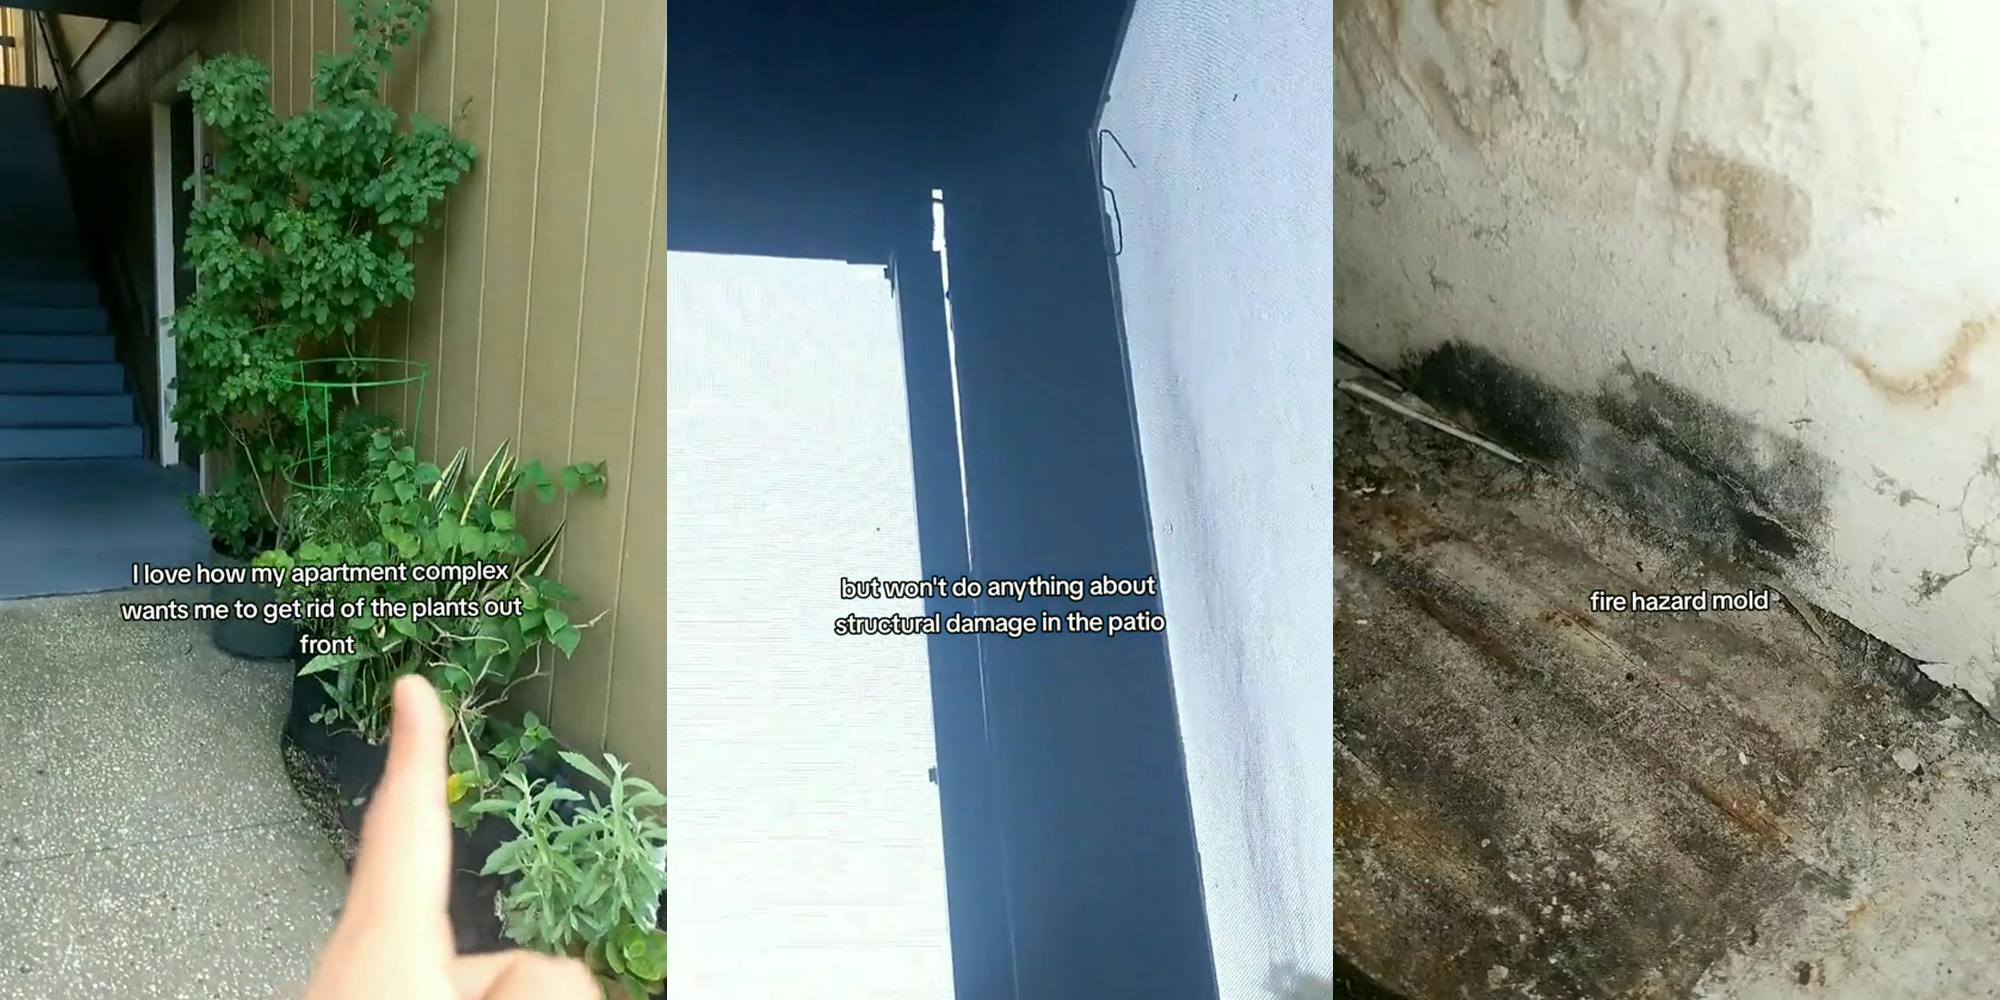 tenant pointing to outdoor plants with caption "I love how my apartment complex wants me to get rid of the plants out front" (l)apartment patio damage with caption "but won't do anything about structural damage to the patio" (c) mold with caption "fire hazard mold" (r)